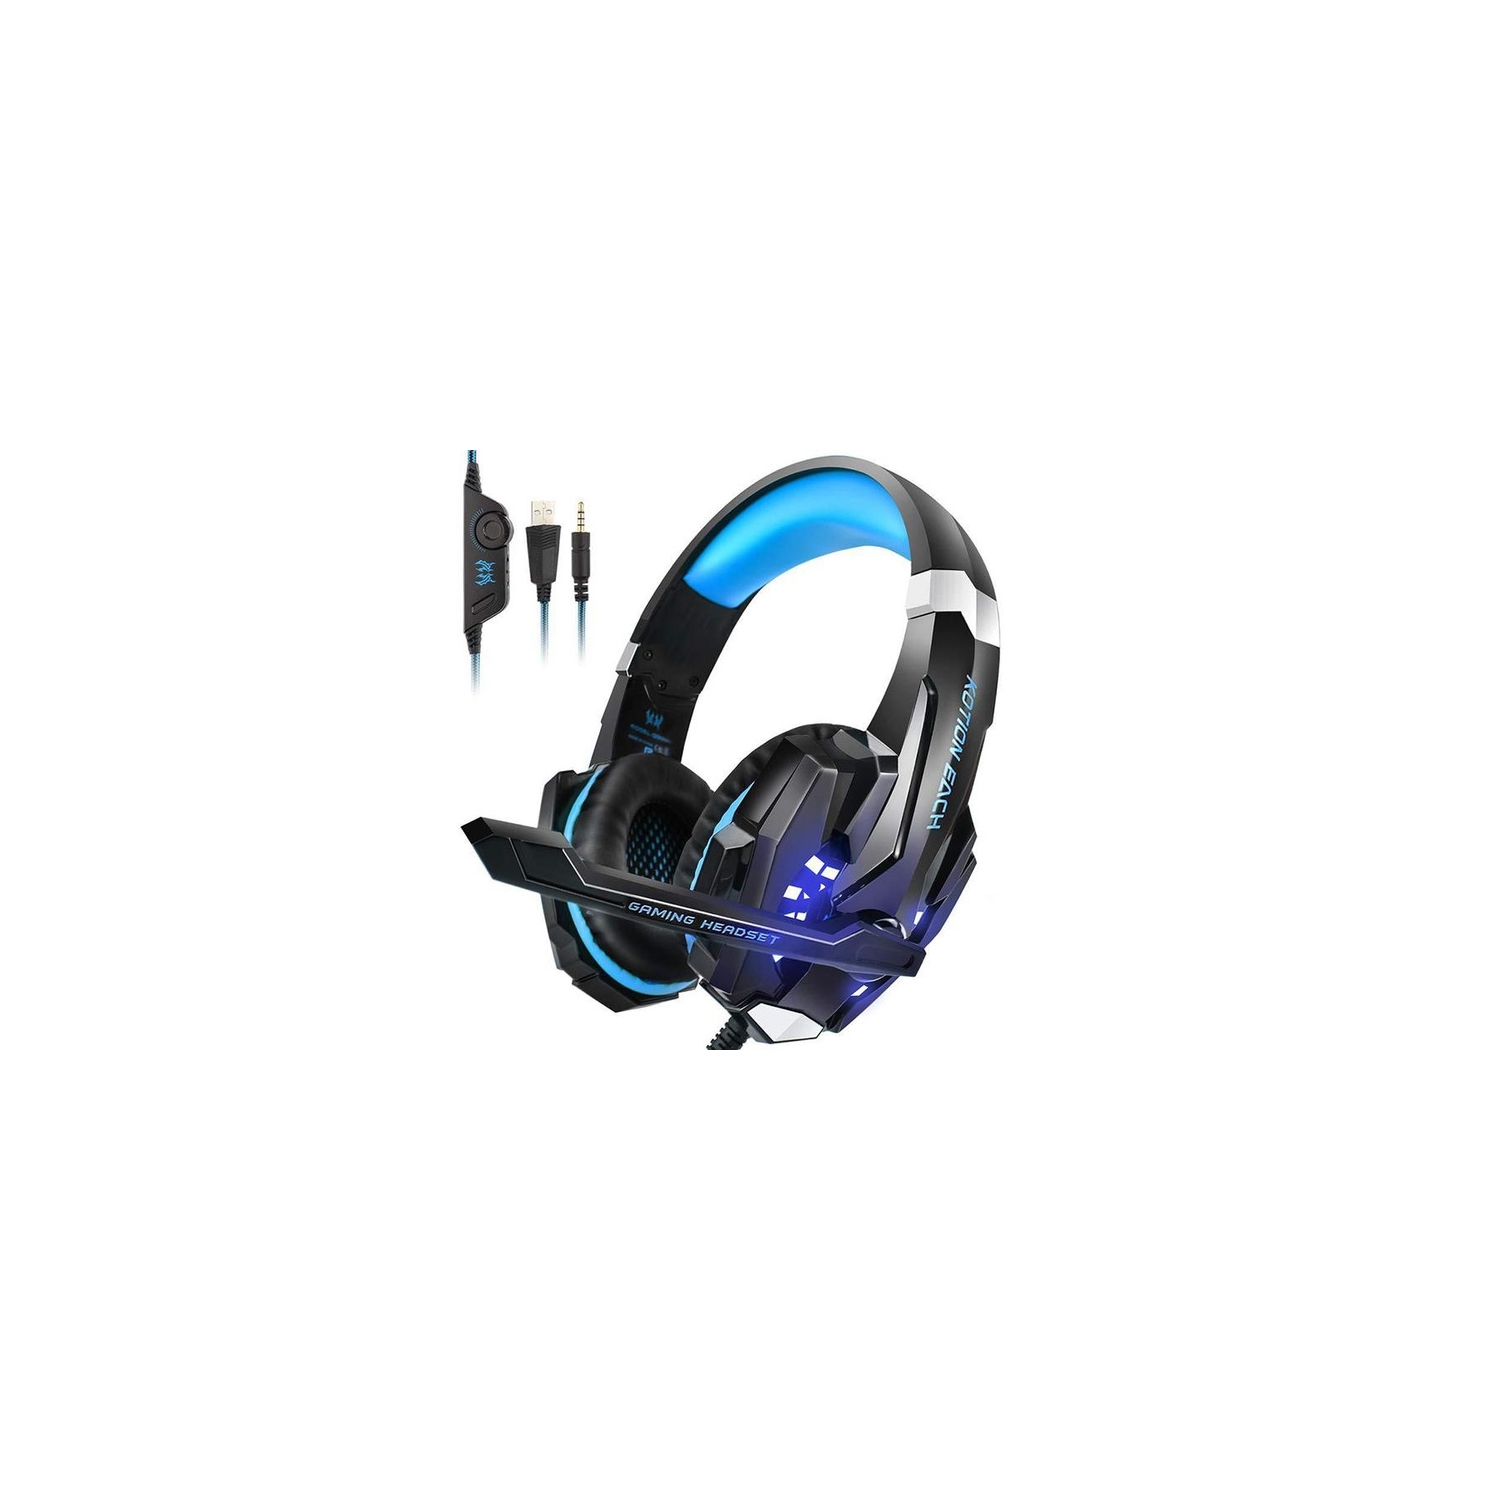 KOTION EACH G9000 3.5mm Gaming Headphone Headset Earphone with Mic LED Light & Volume Control for PS4 Laptop Tablet Mobile Phones